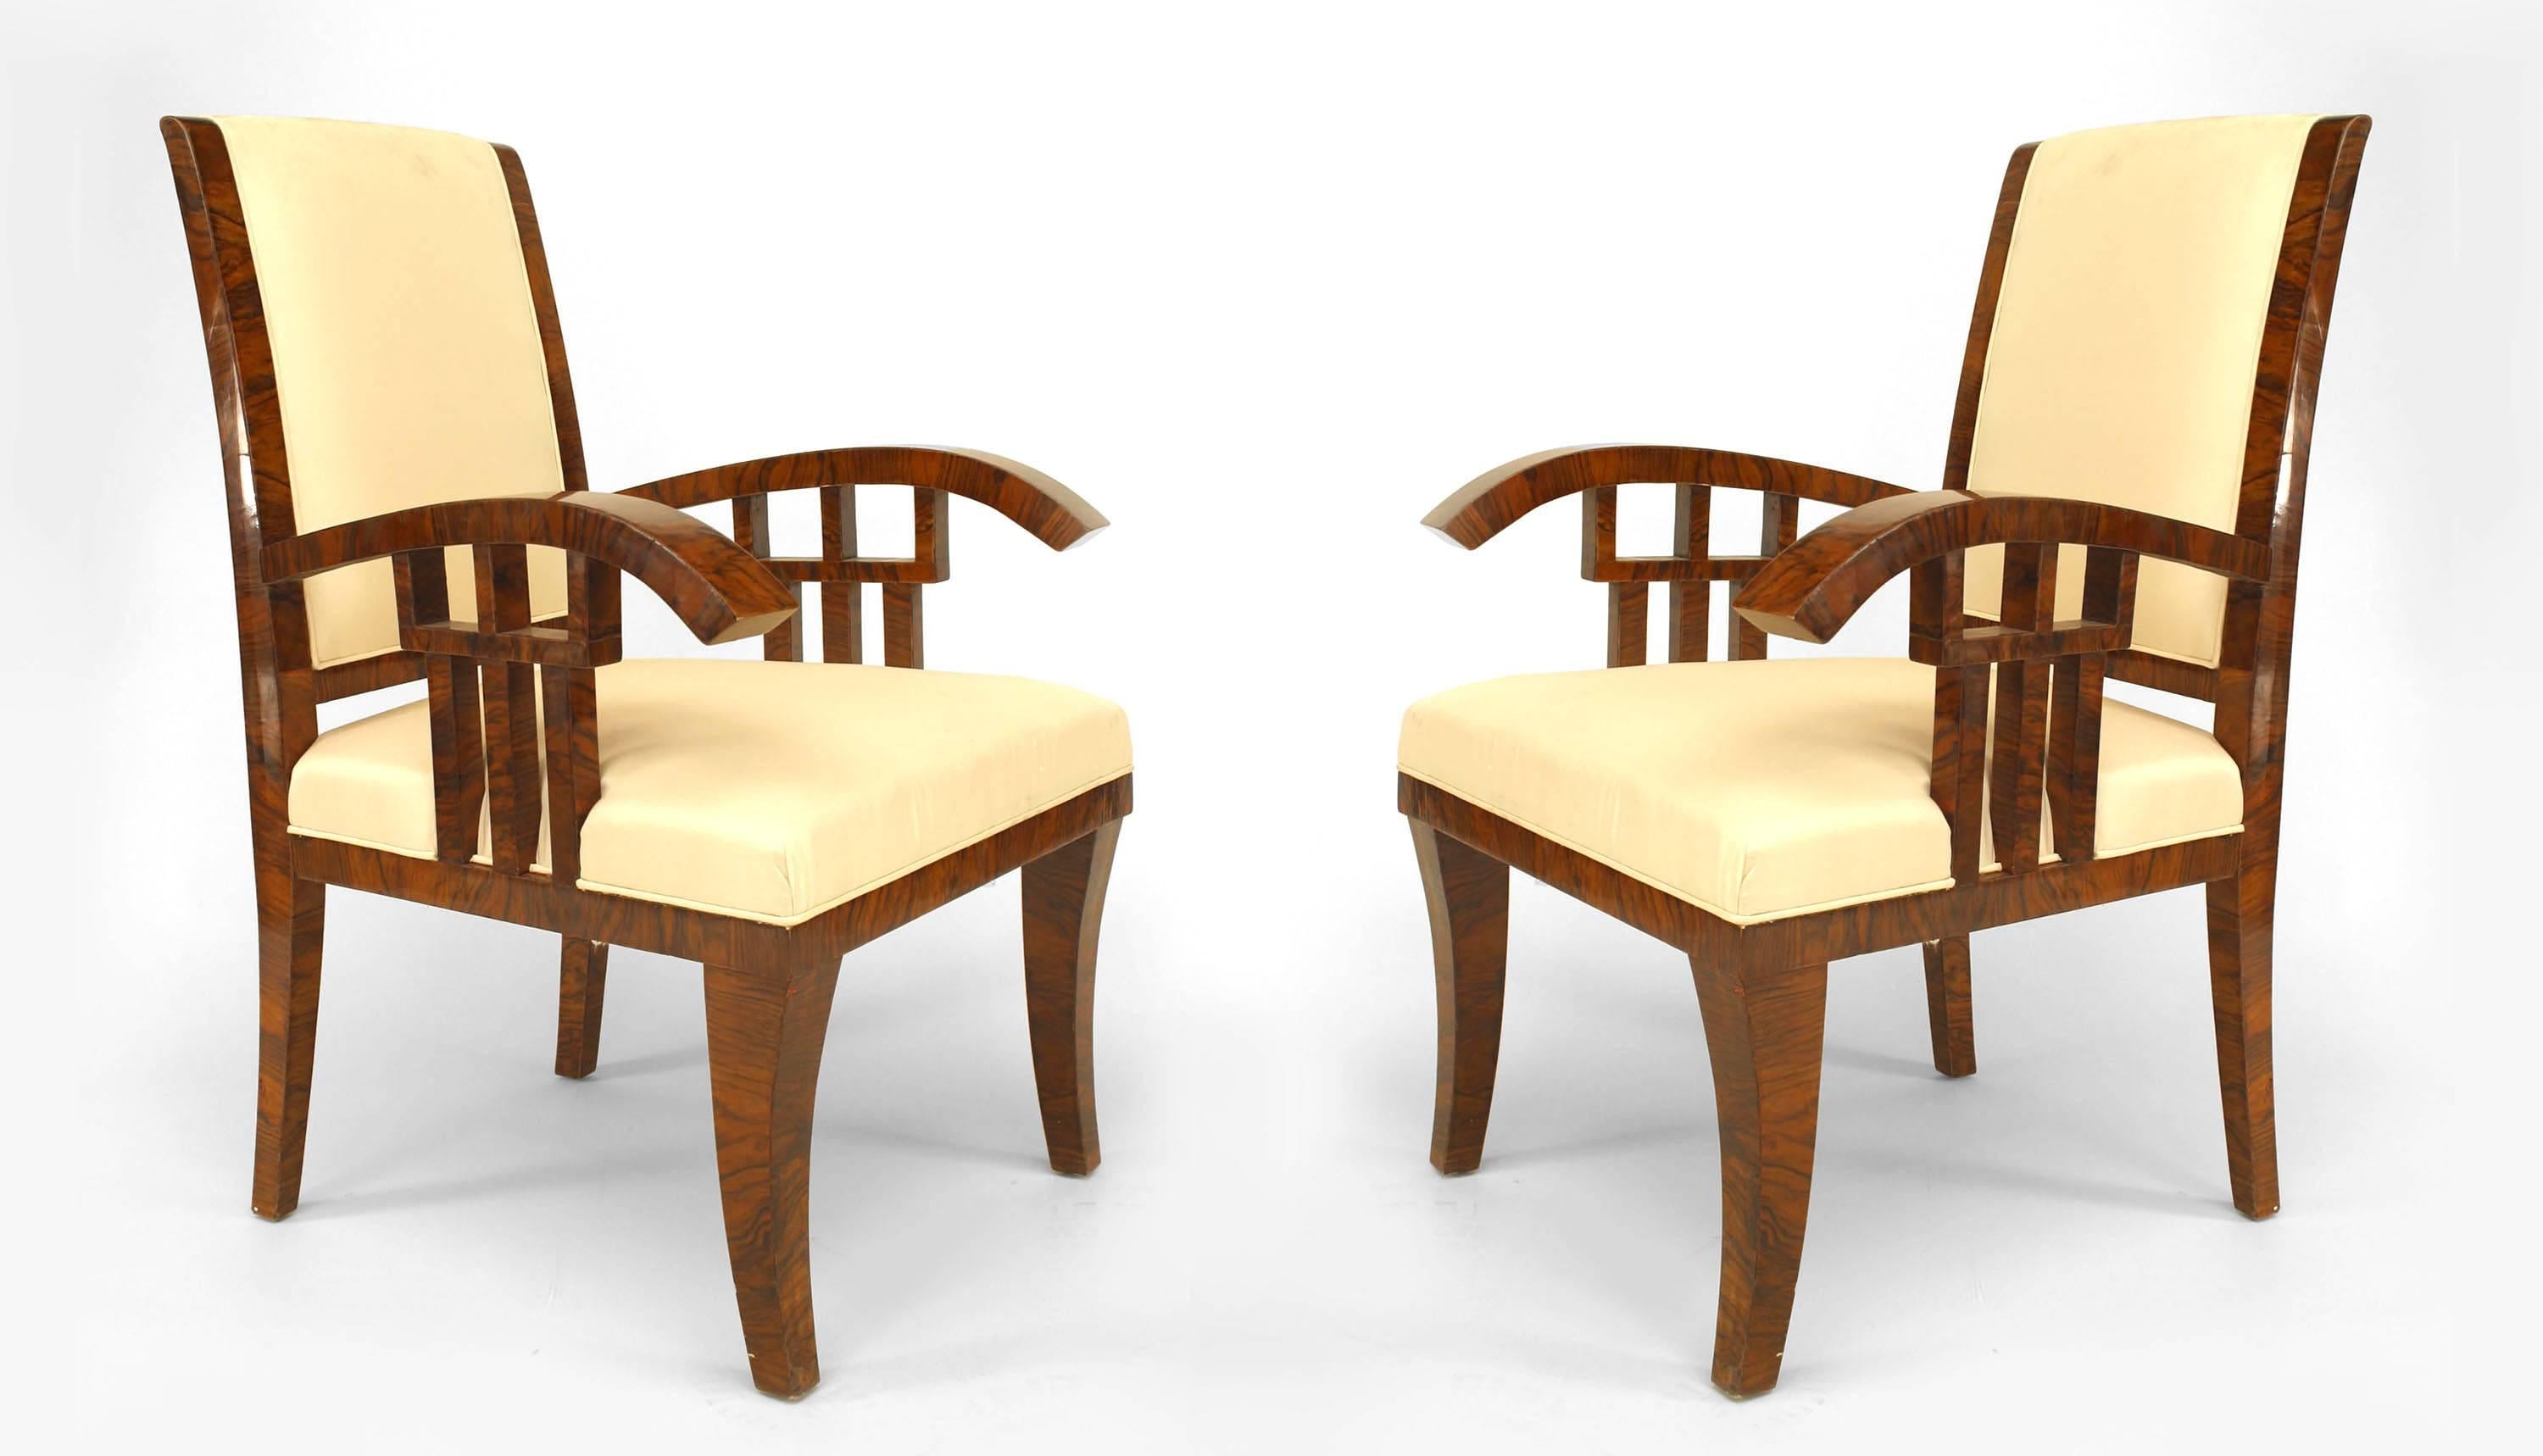 Pair of Hungarian Art Deco walnut armchairs featuring geometric open design underarms, seats and backs upholstered in cream fabric, and square tapered leg supports. Attributed to Lajos Kozma.